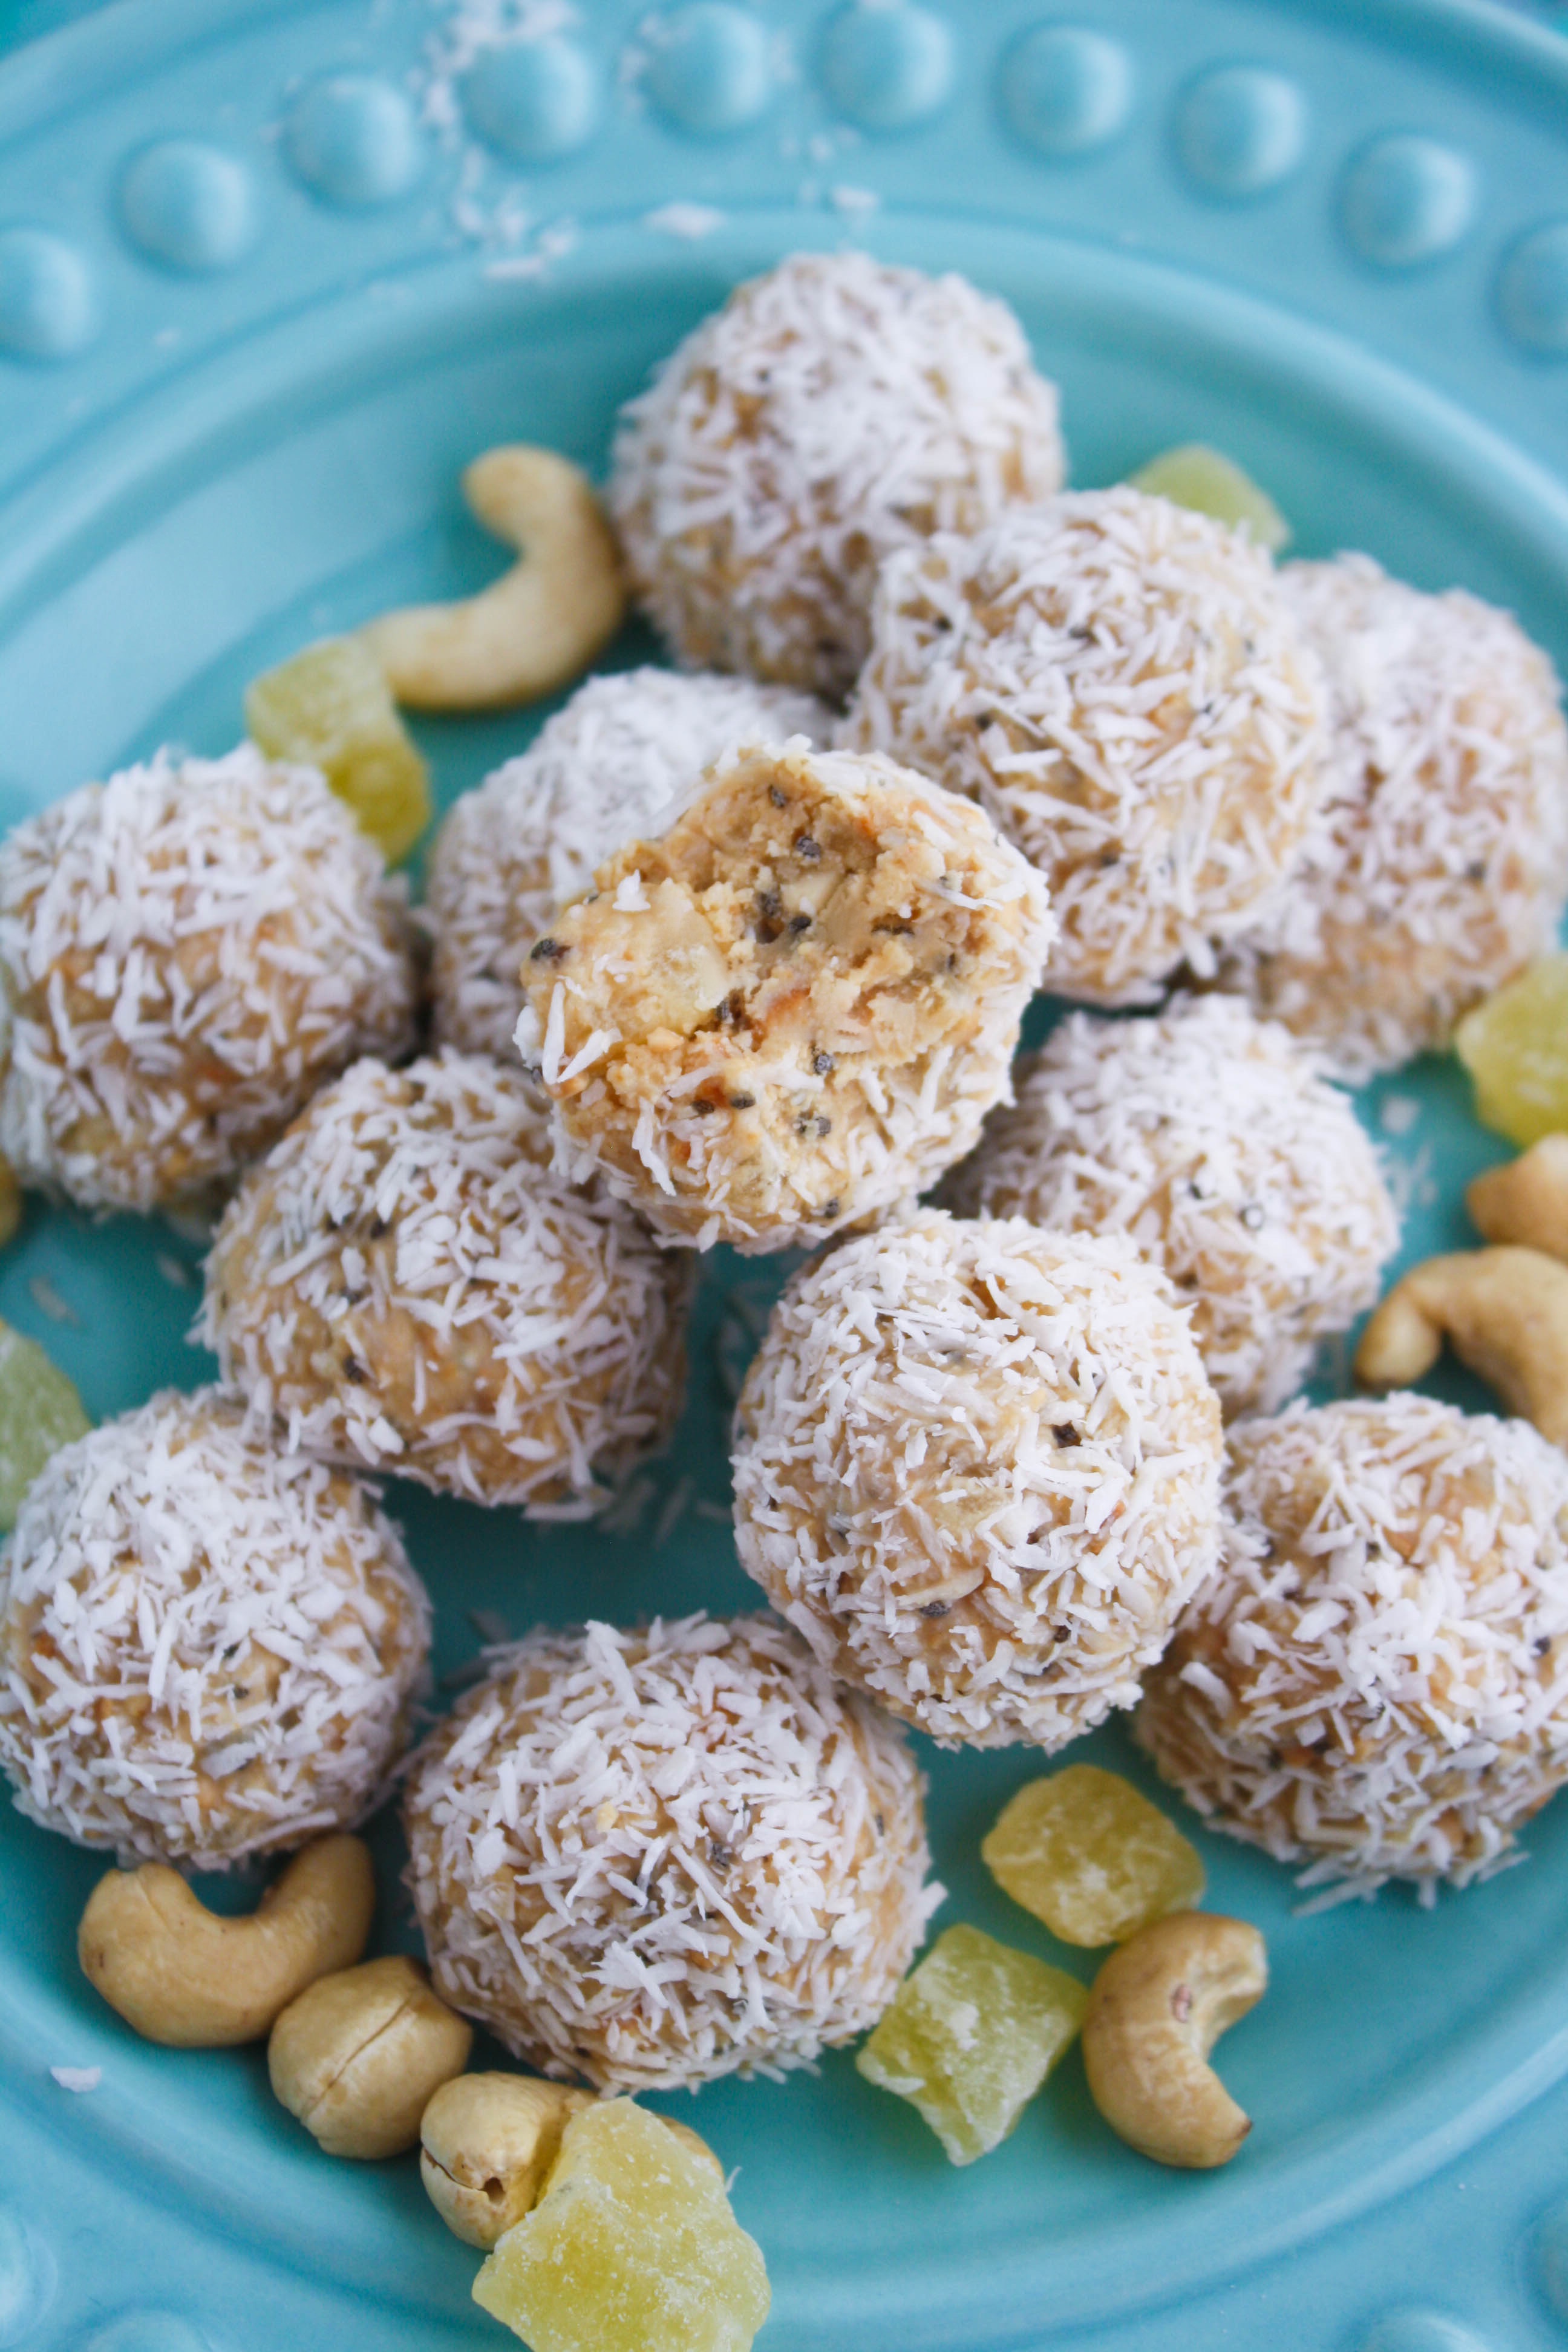 No bake coconut, cashew, and pineapple energy bites are a fun and healthy snack option. You'll enjoy these no bake energy bites when you're hungry!